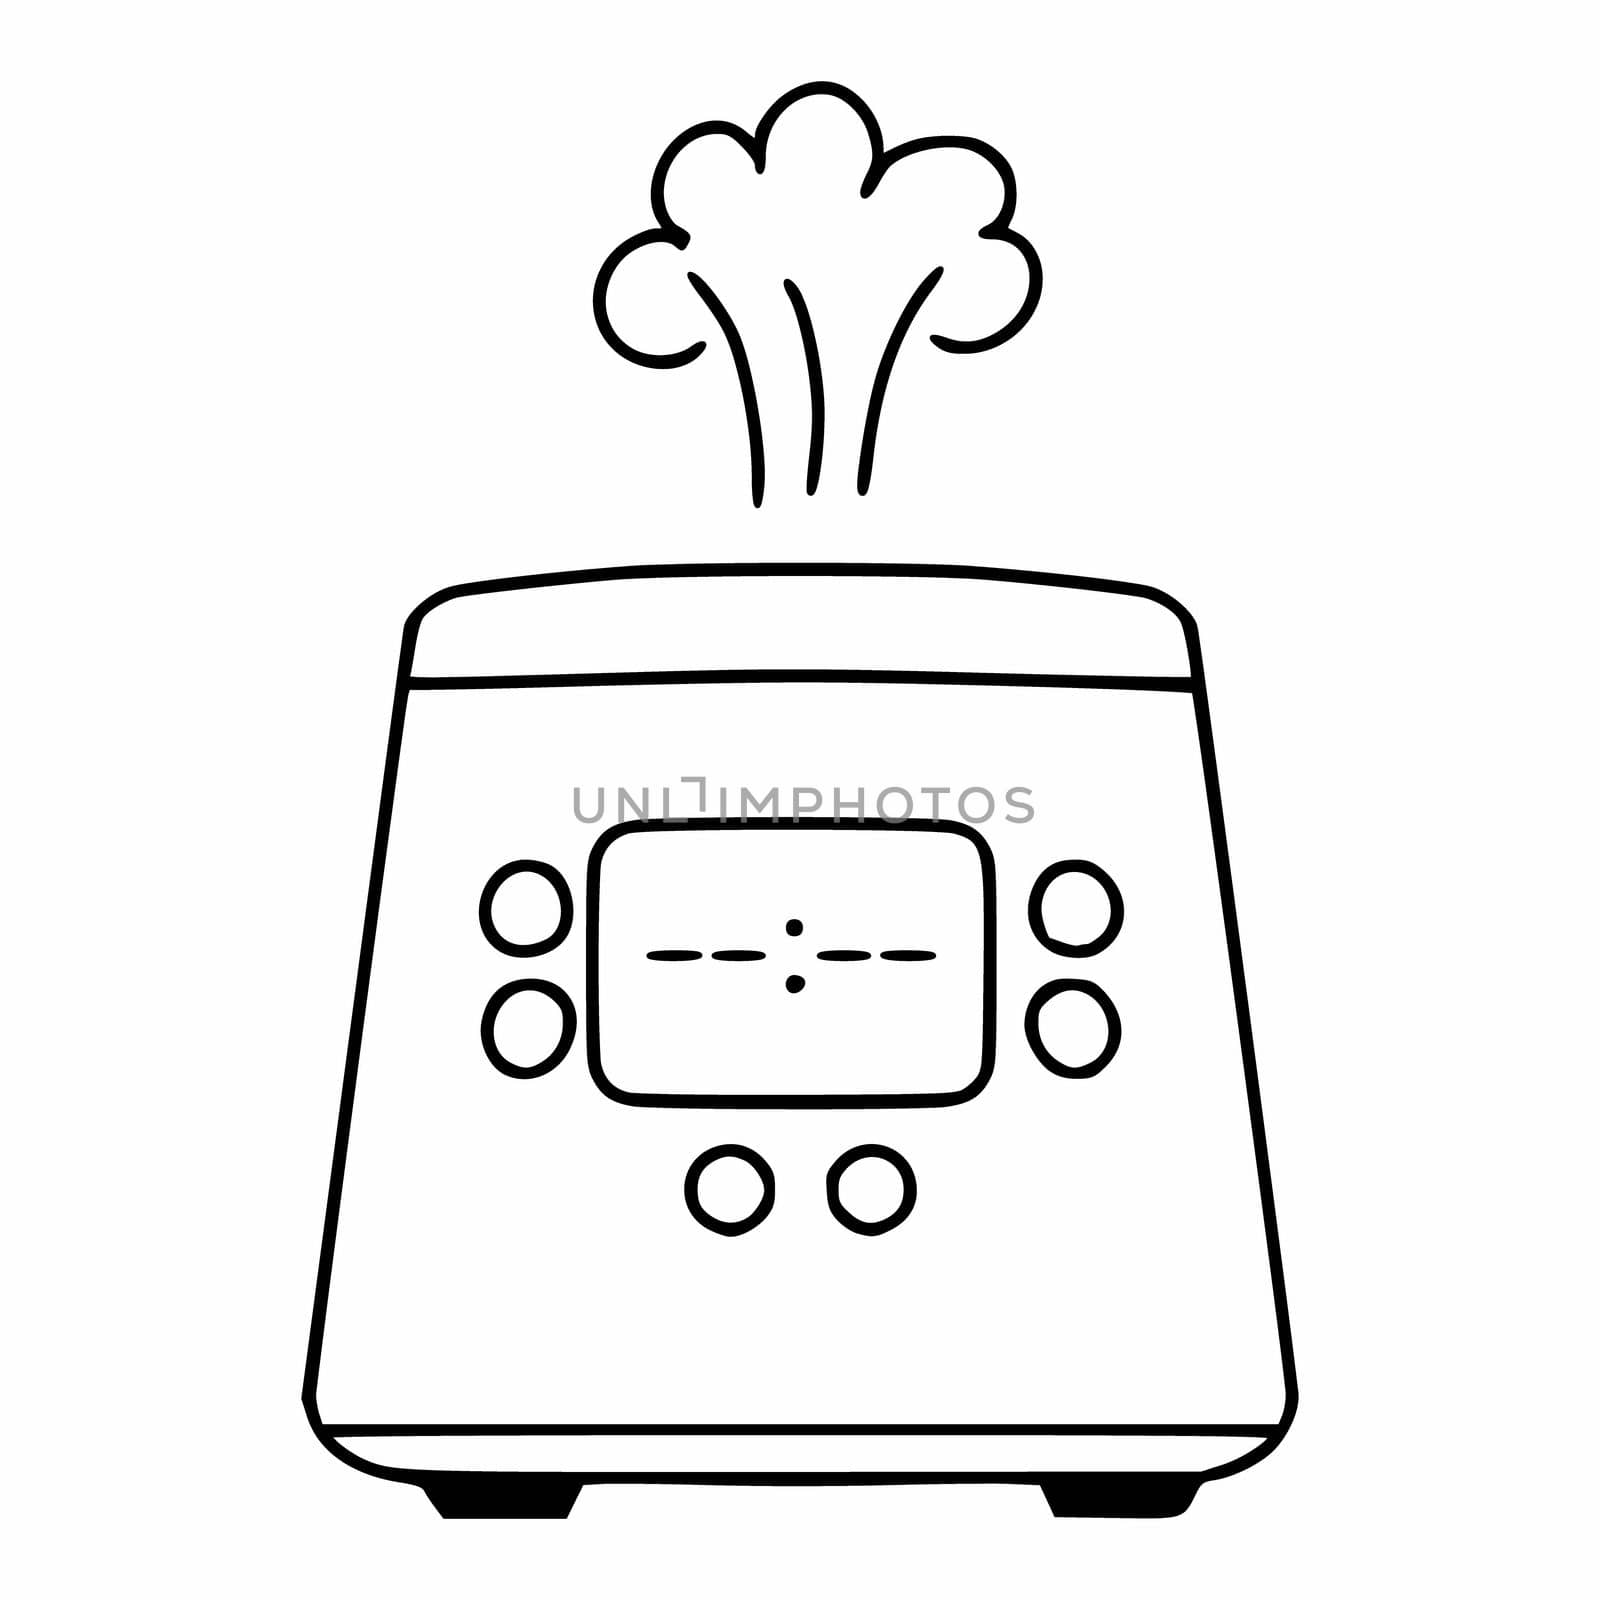 Electric slow cooker in the style of doodle. Kitchen appliances for cooking.